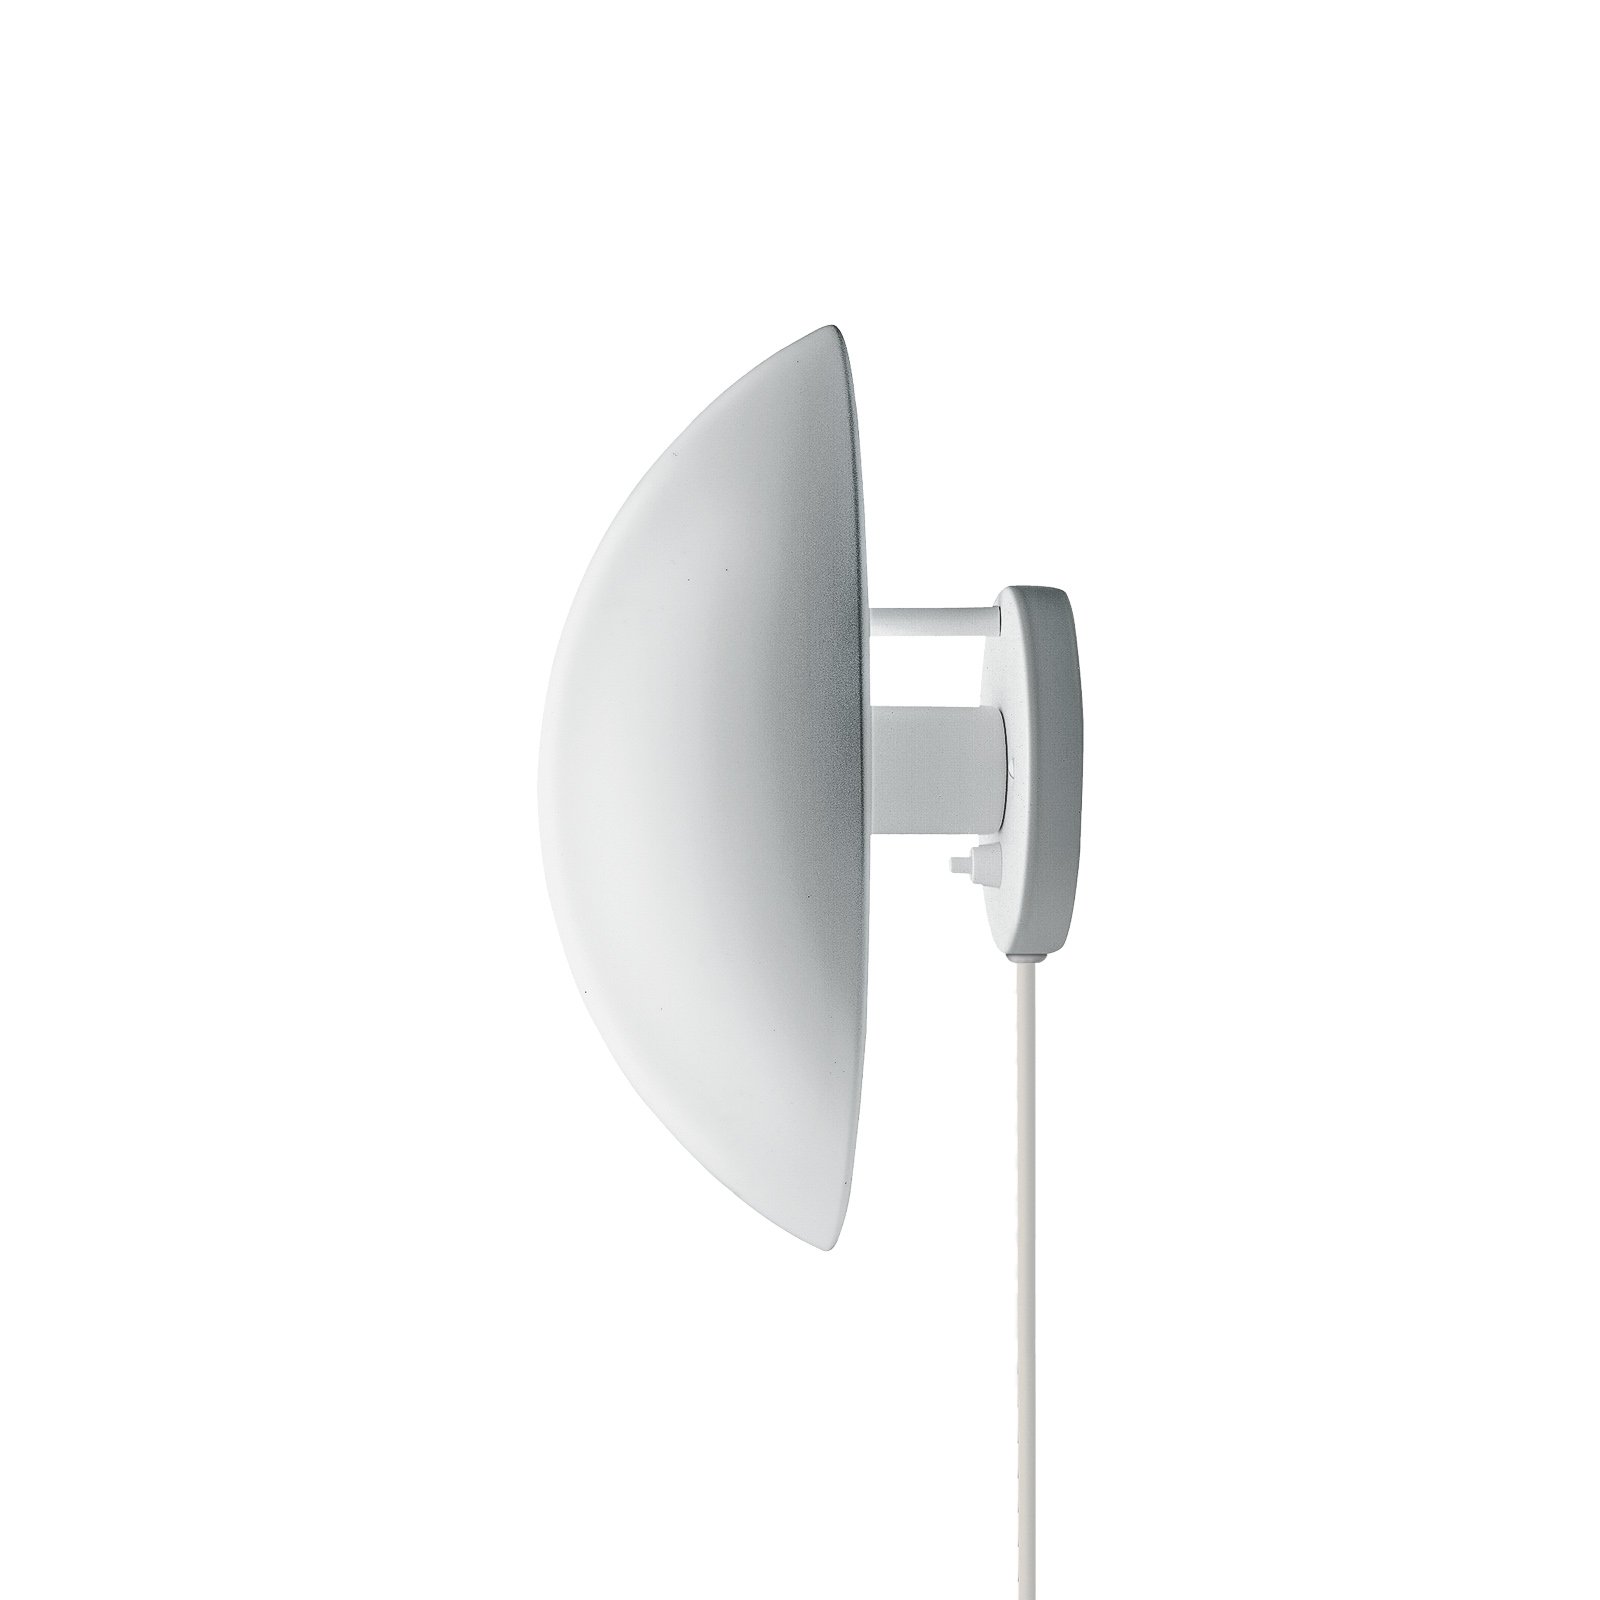 Louis Poulsen PH Hat wall light with plug